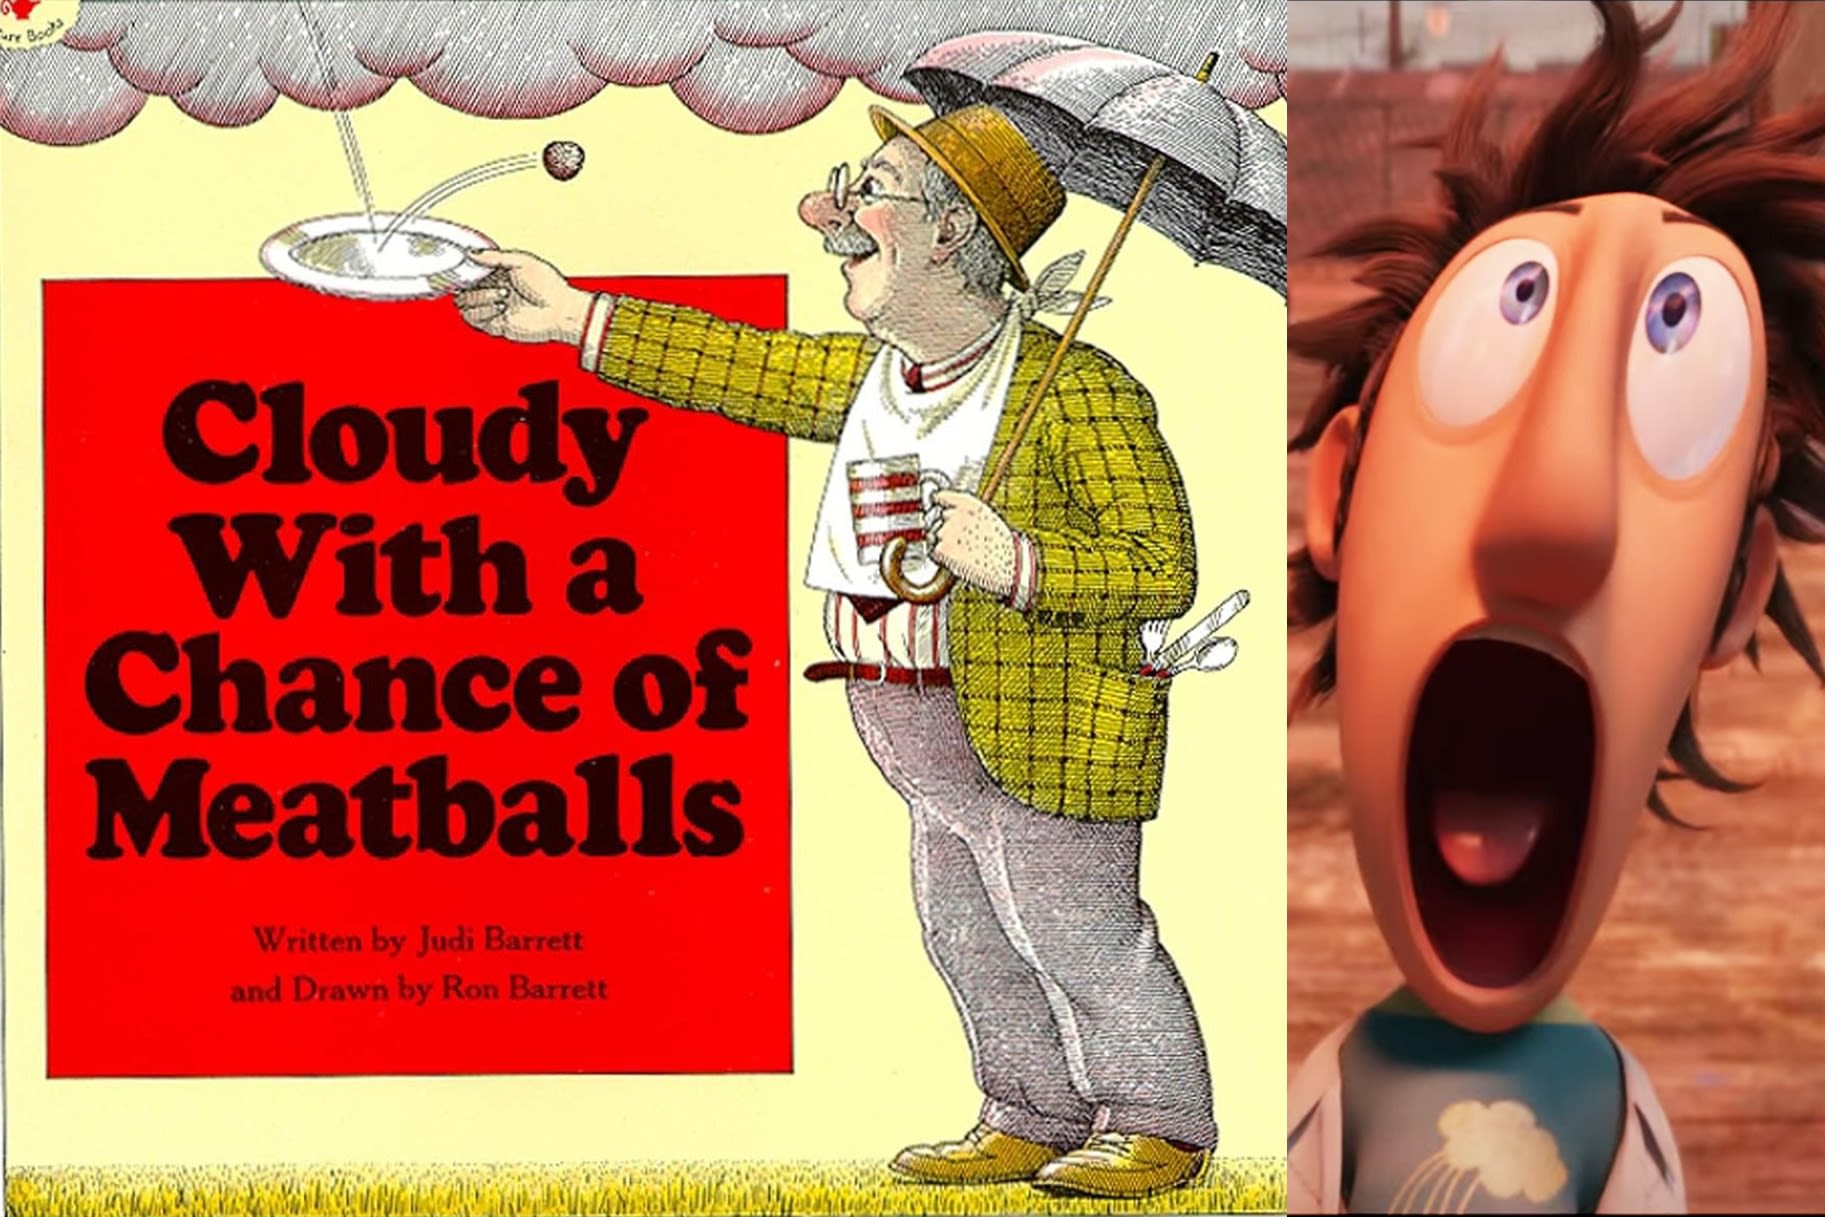 Remembering the Delicious Whimsy of the Cloudy with a Chance of Meatballs Book